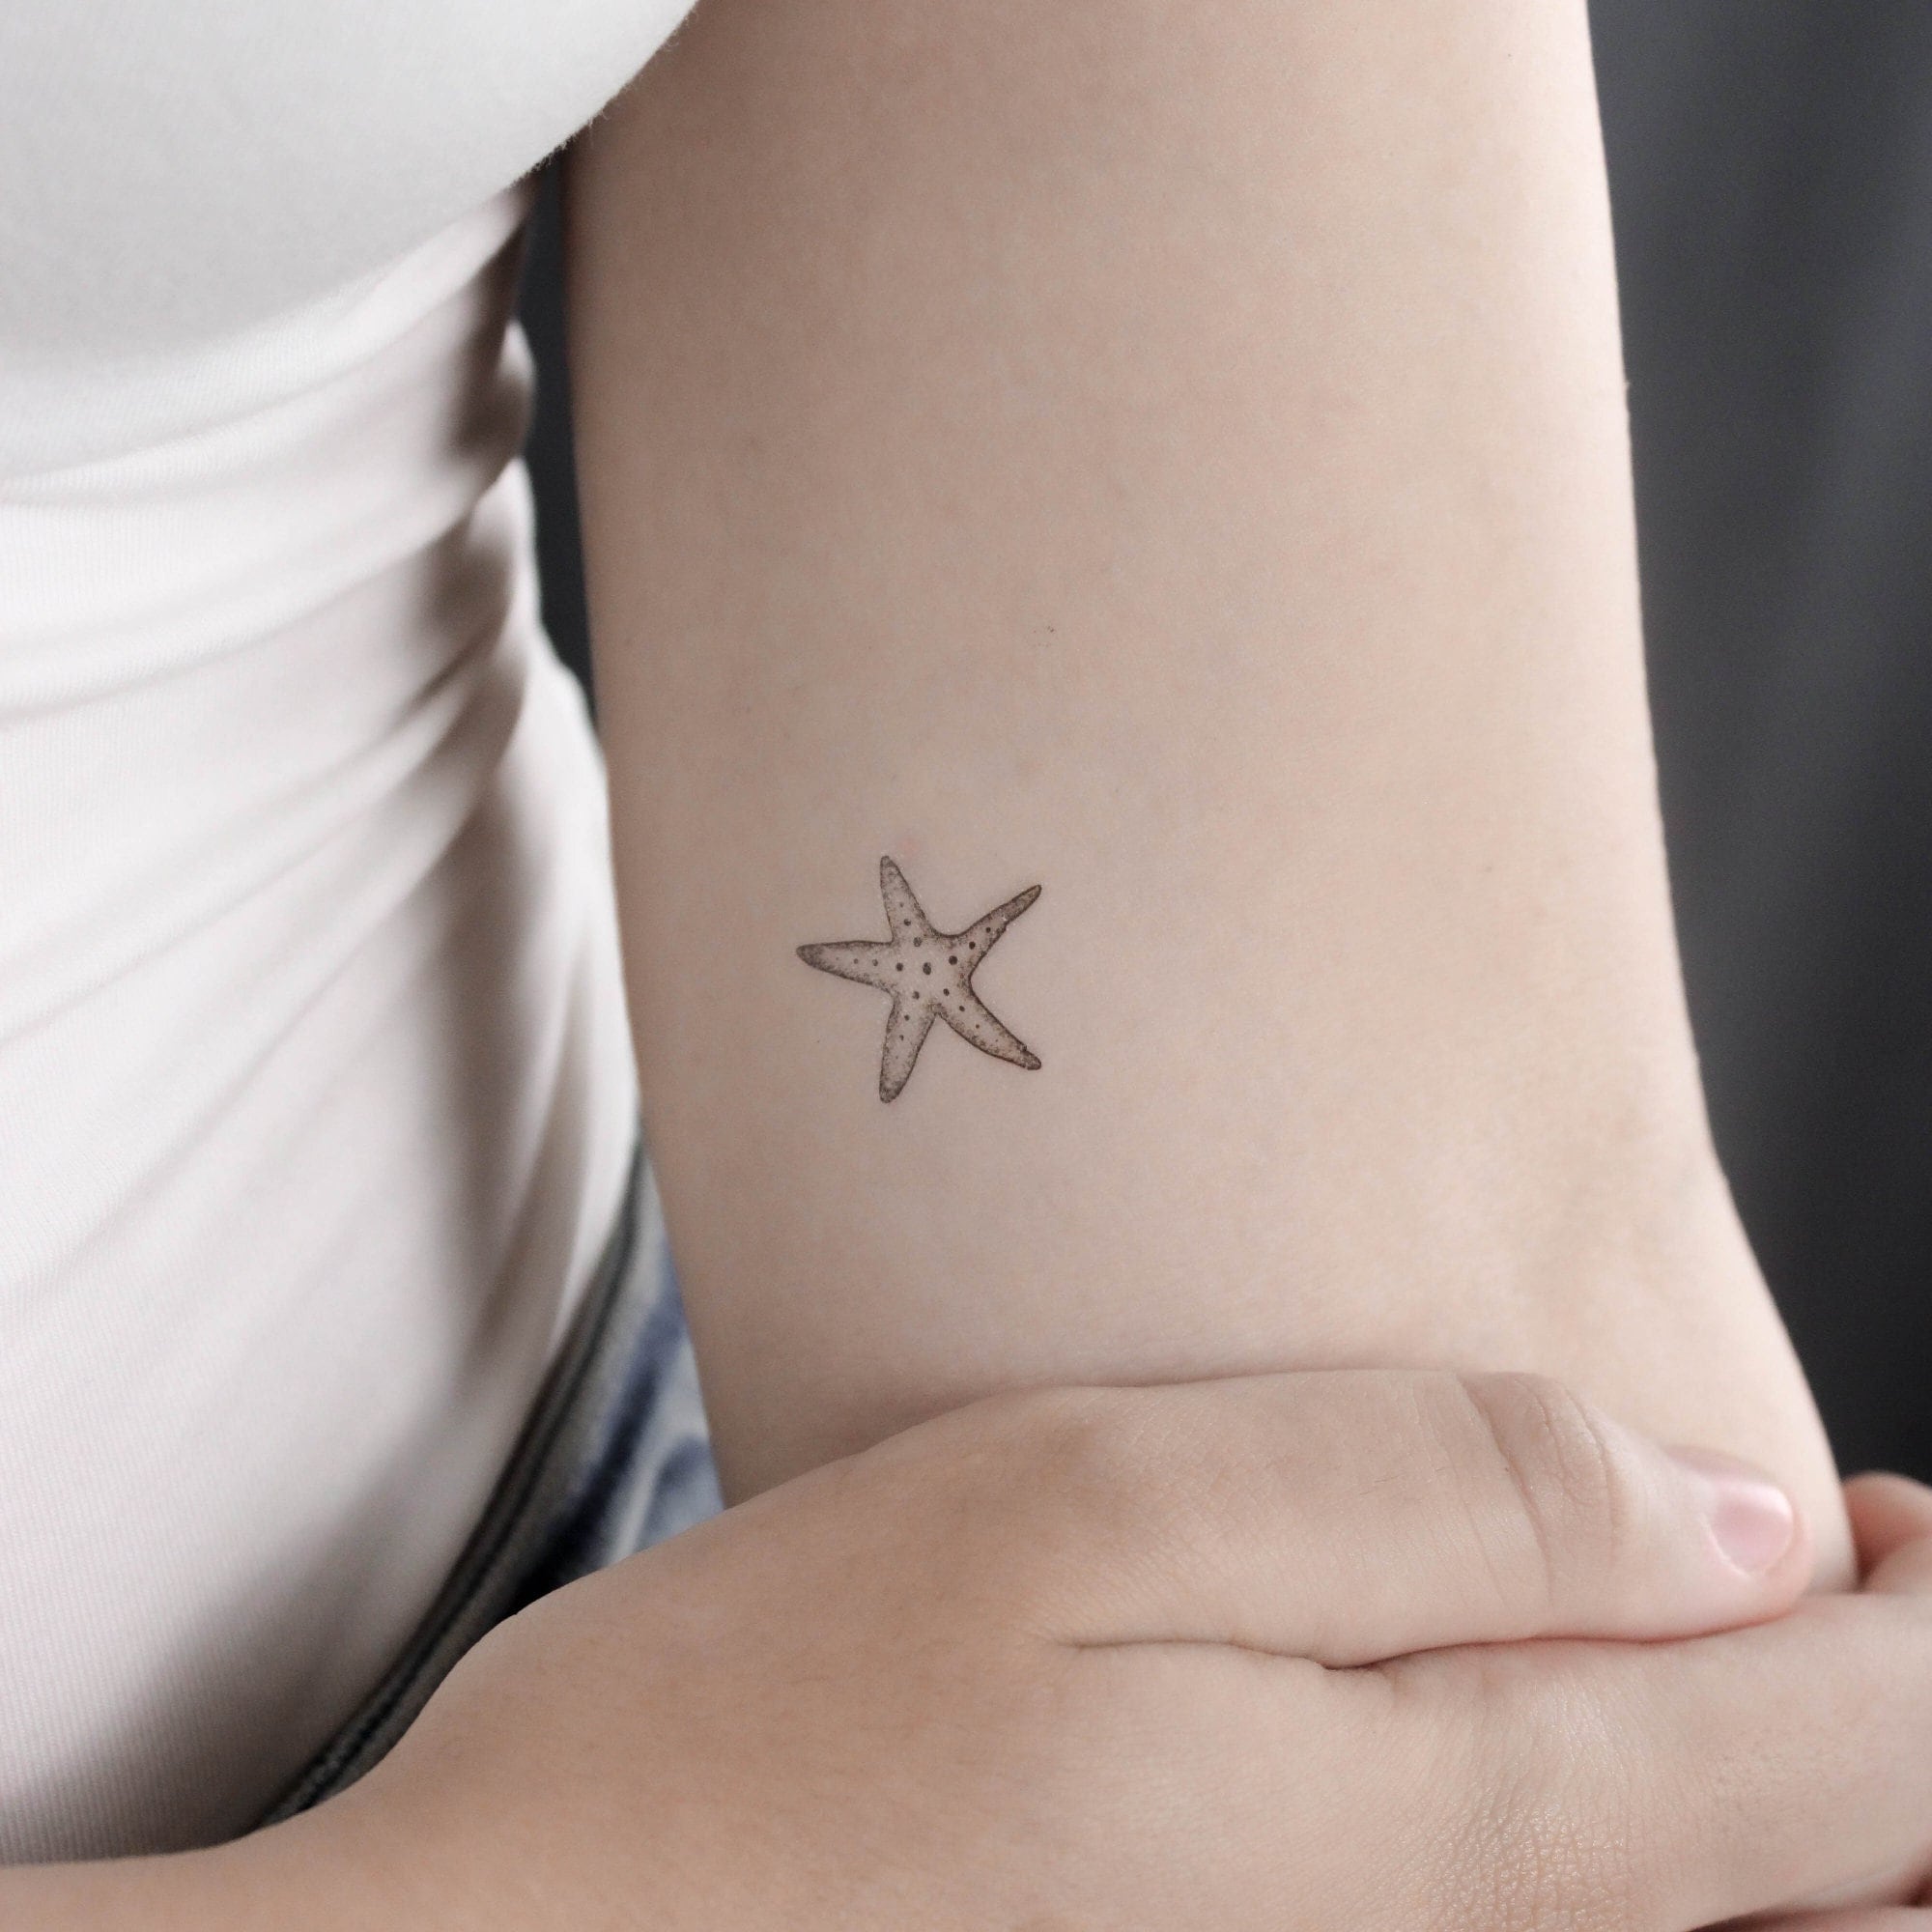 Brianna Bing Tattoos - Quarter sized starfish ⭐️ I am booking appointments  for March & April! FULL DAYS OPEN; Noon - 8pm March 12, 20, 21, 22, 28, 29  Next Saturday available